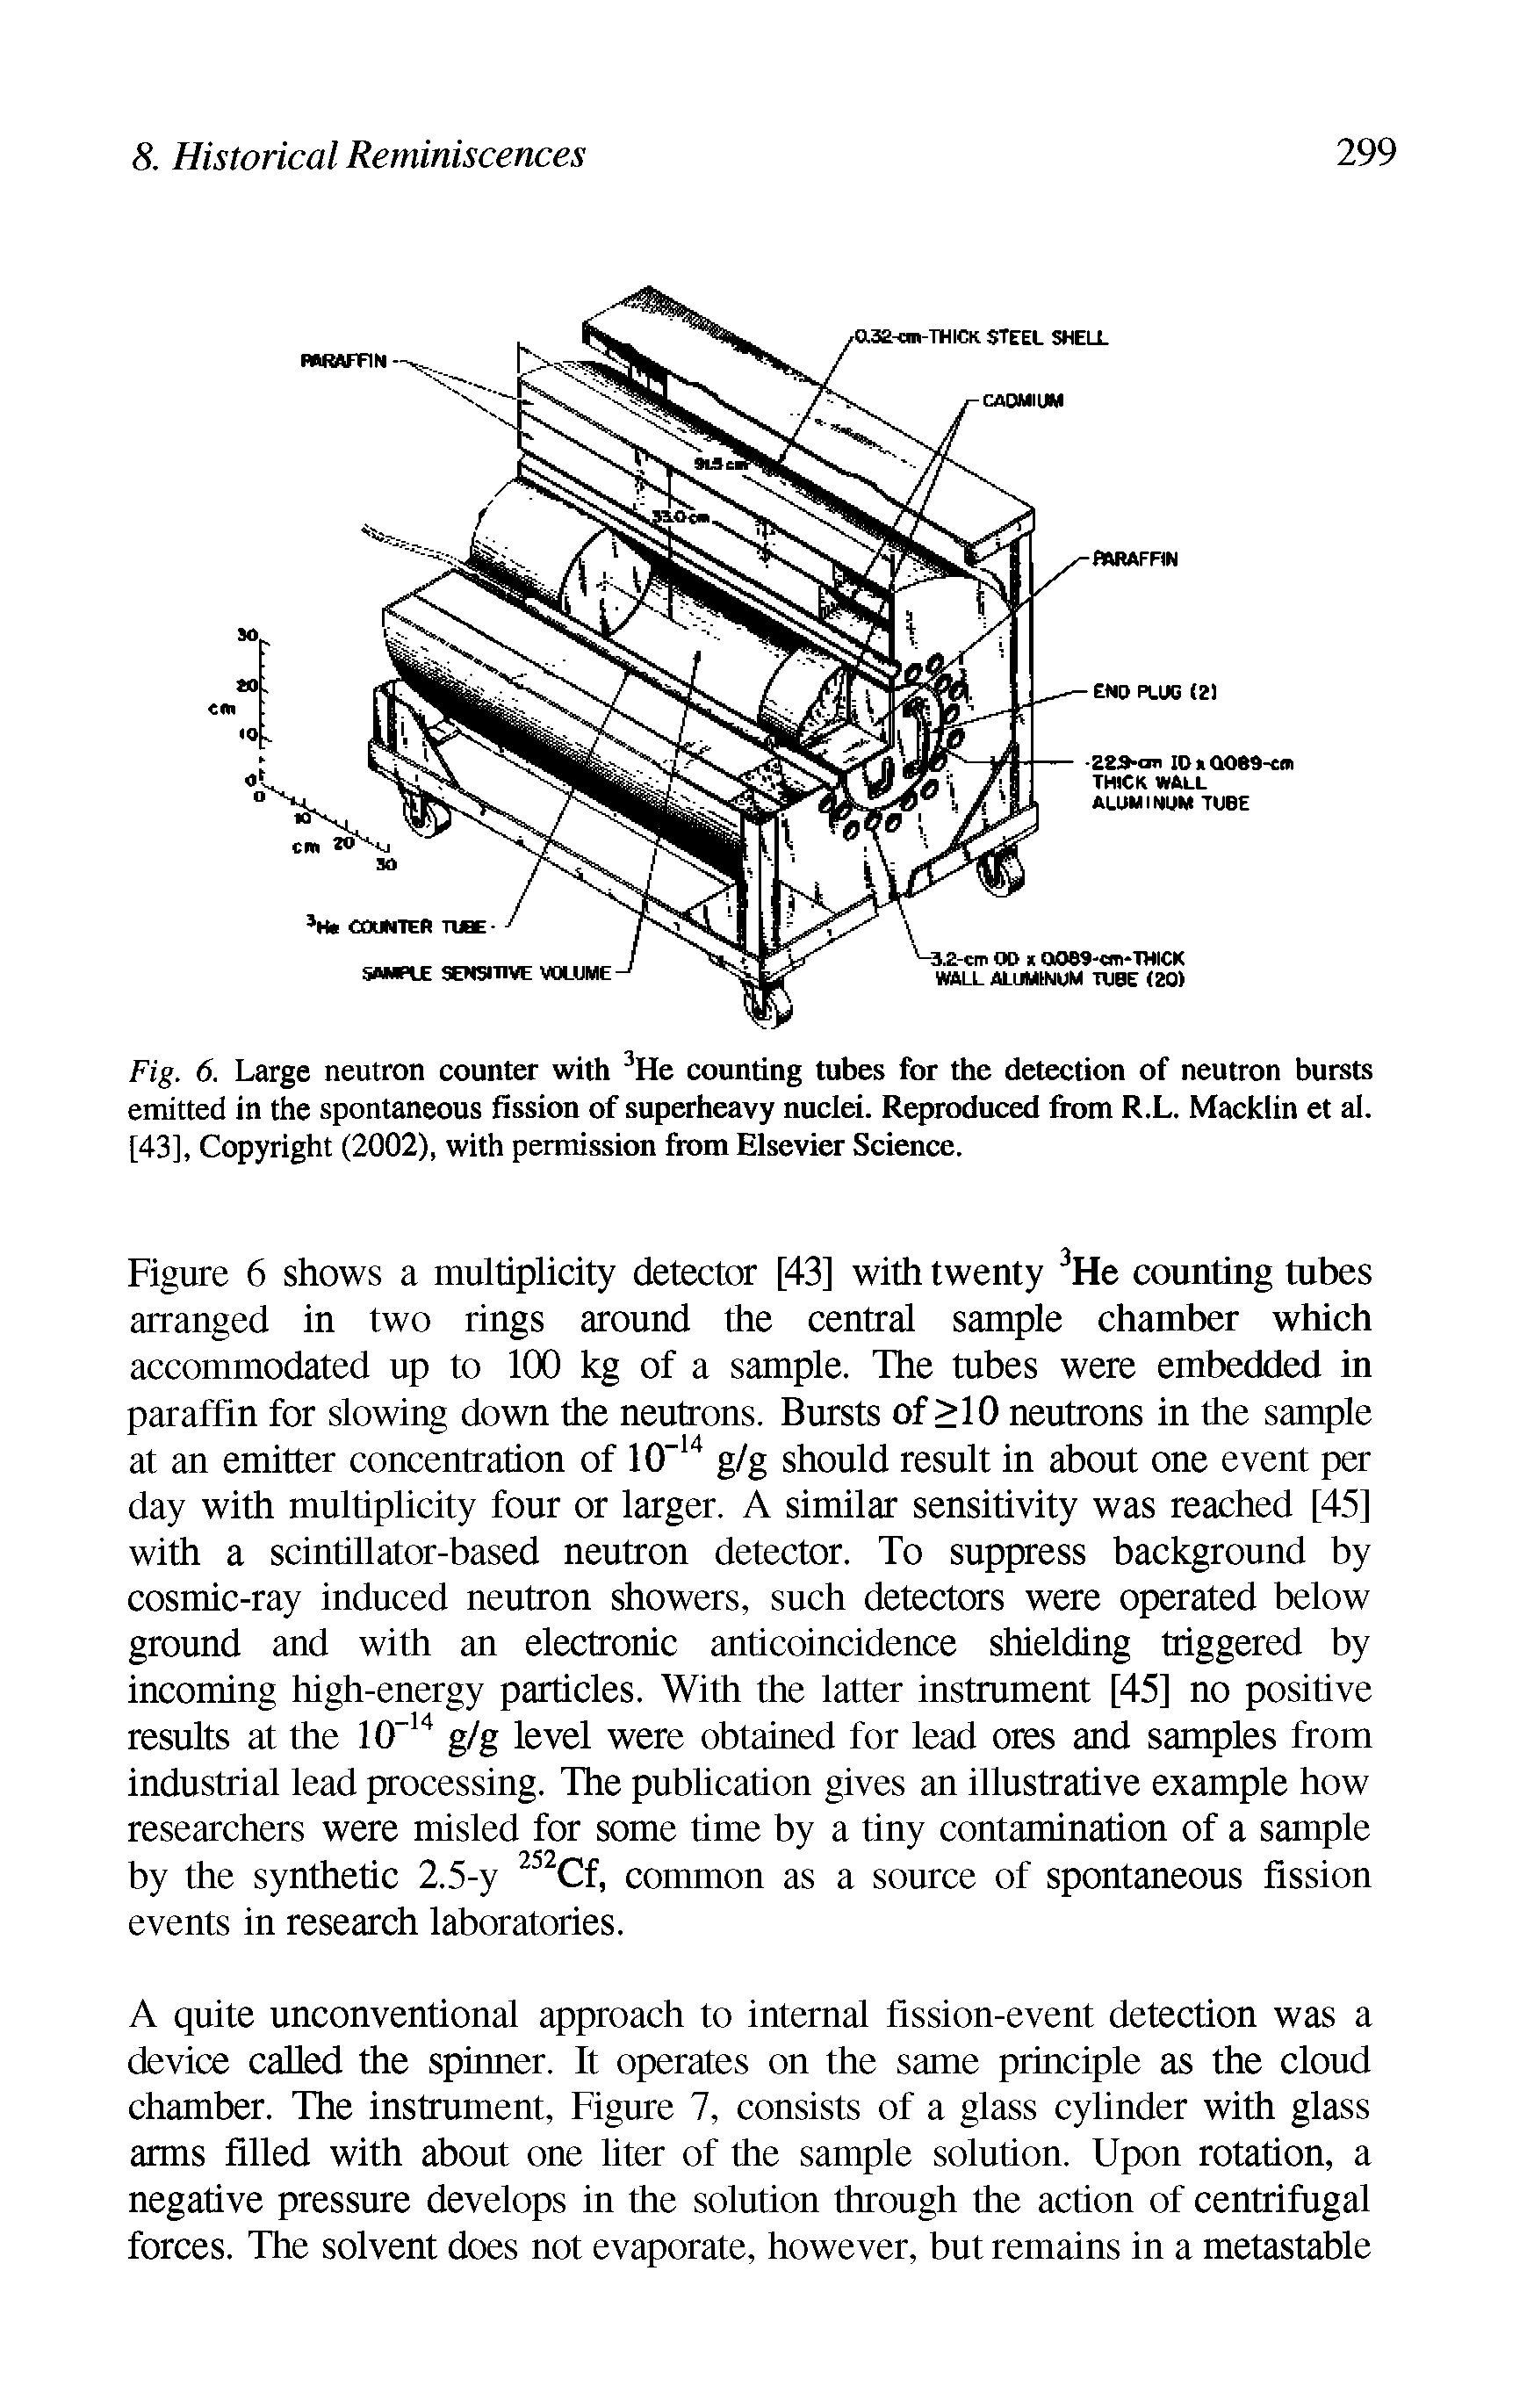 Fig. 6. Large neutron counter with 3He counting tubes for the detection of neutron bursts emitted in the spontaneous fission of superheavy nuclei. Reproduced from R.L. Macklin et al. [43], Copyright (2002), with permission from Elsevier Science.